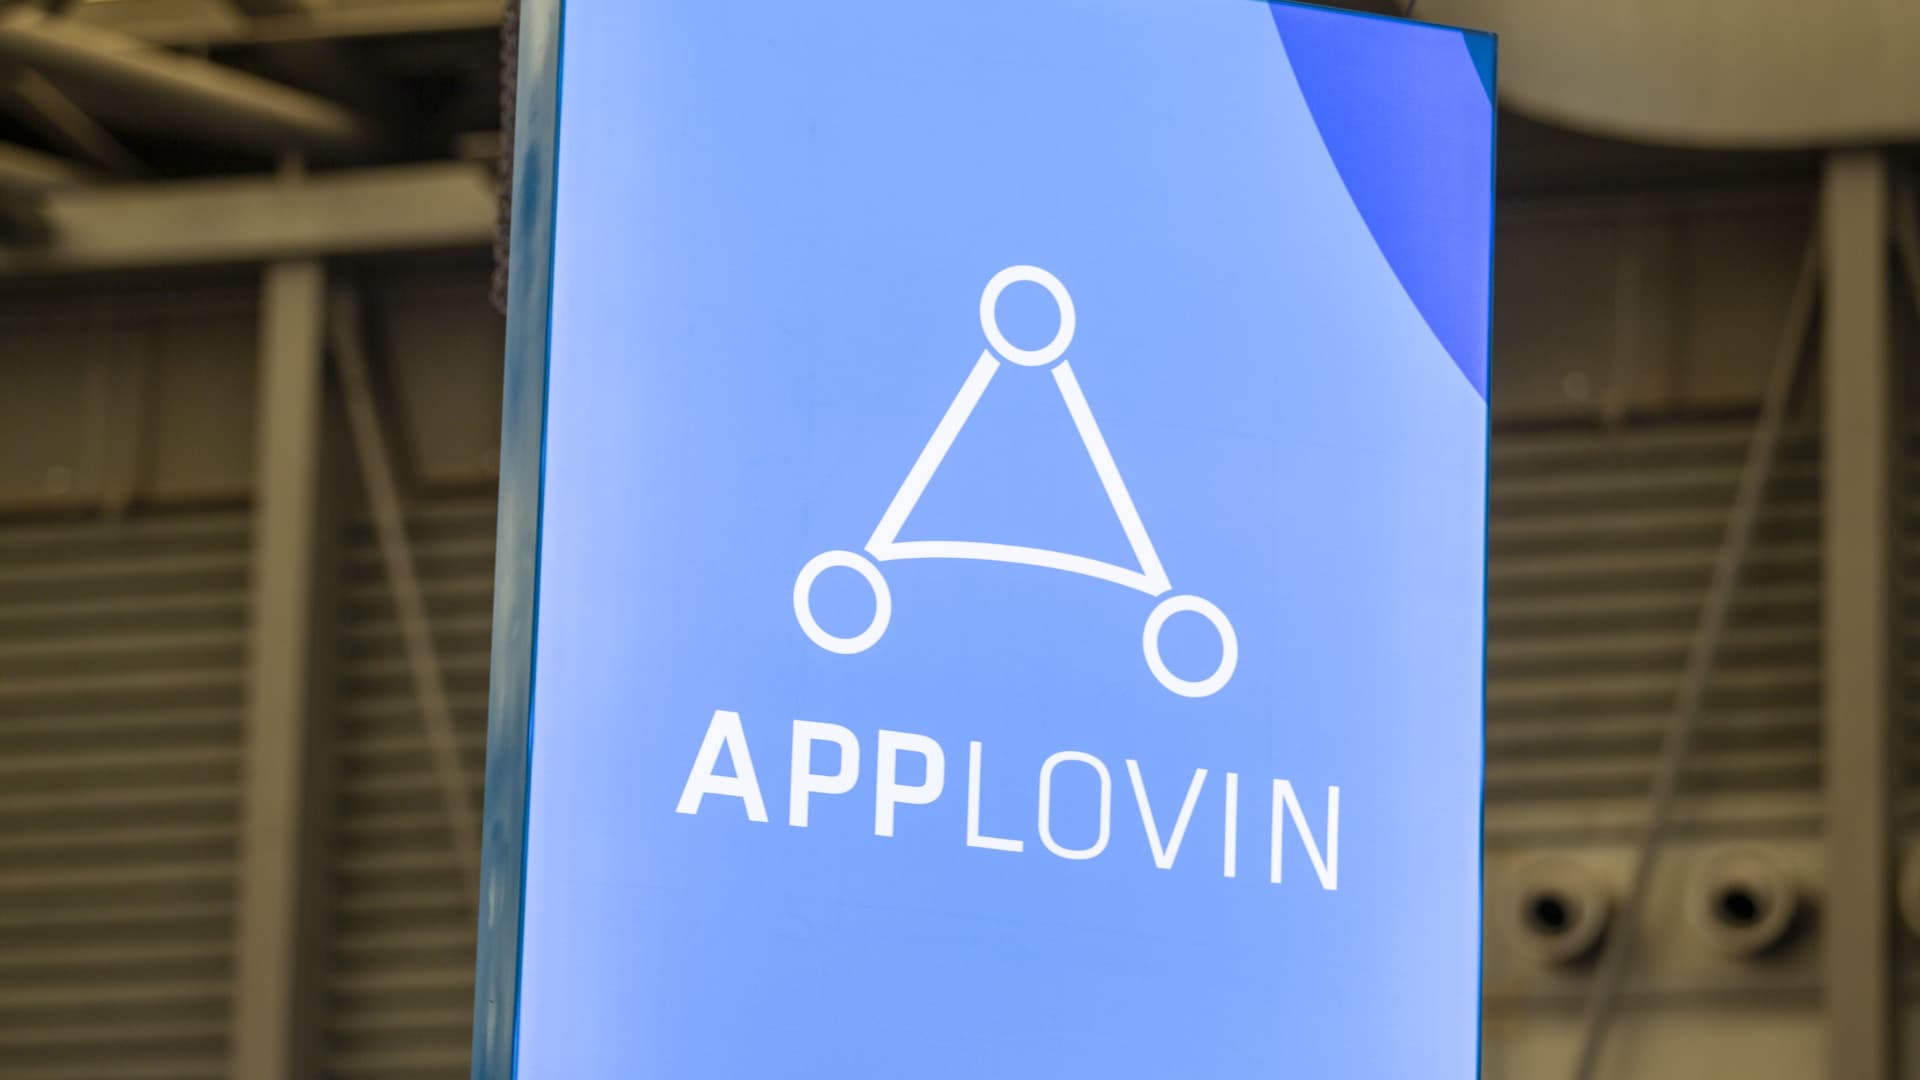 AppLovin abandons effort to acquire Unity after  billion bid was rejected